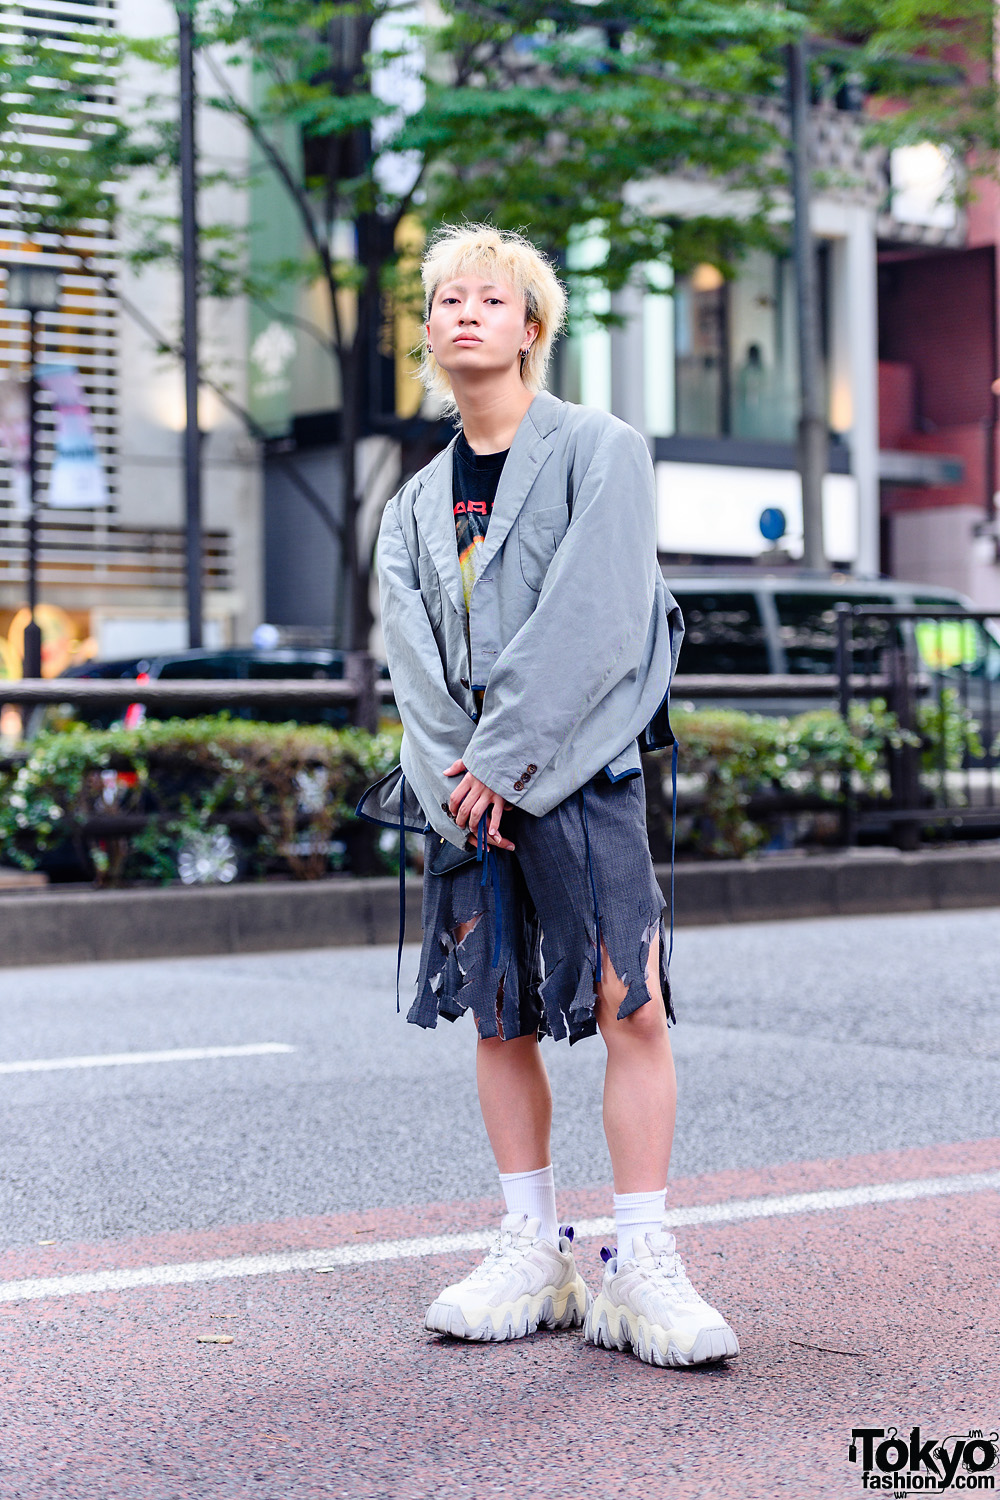 Deconstructed Tokyo Streetwear Style w/ Blonde Pageboy Cut, Comme des Garcons Cropped Blazer, Marilyn Manson Shirt, Distressed Trouser Shorts & Eytys Chunky Sneakers